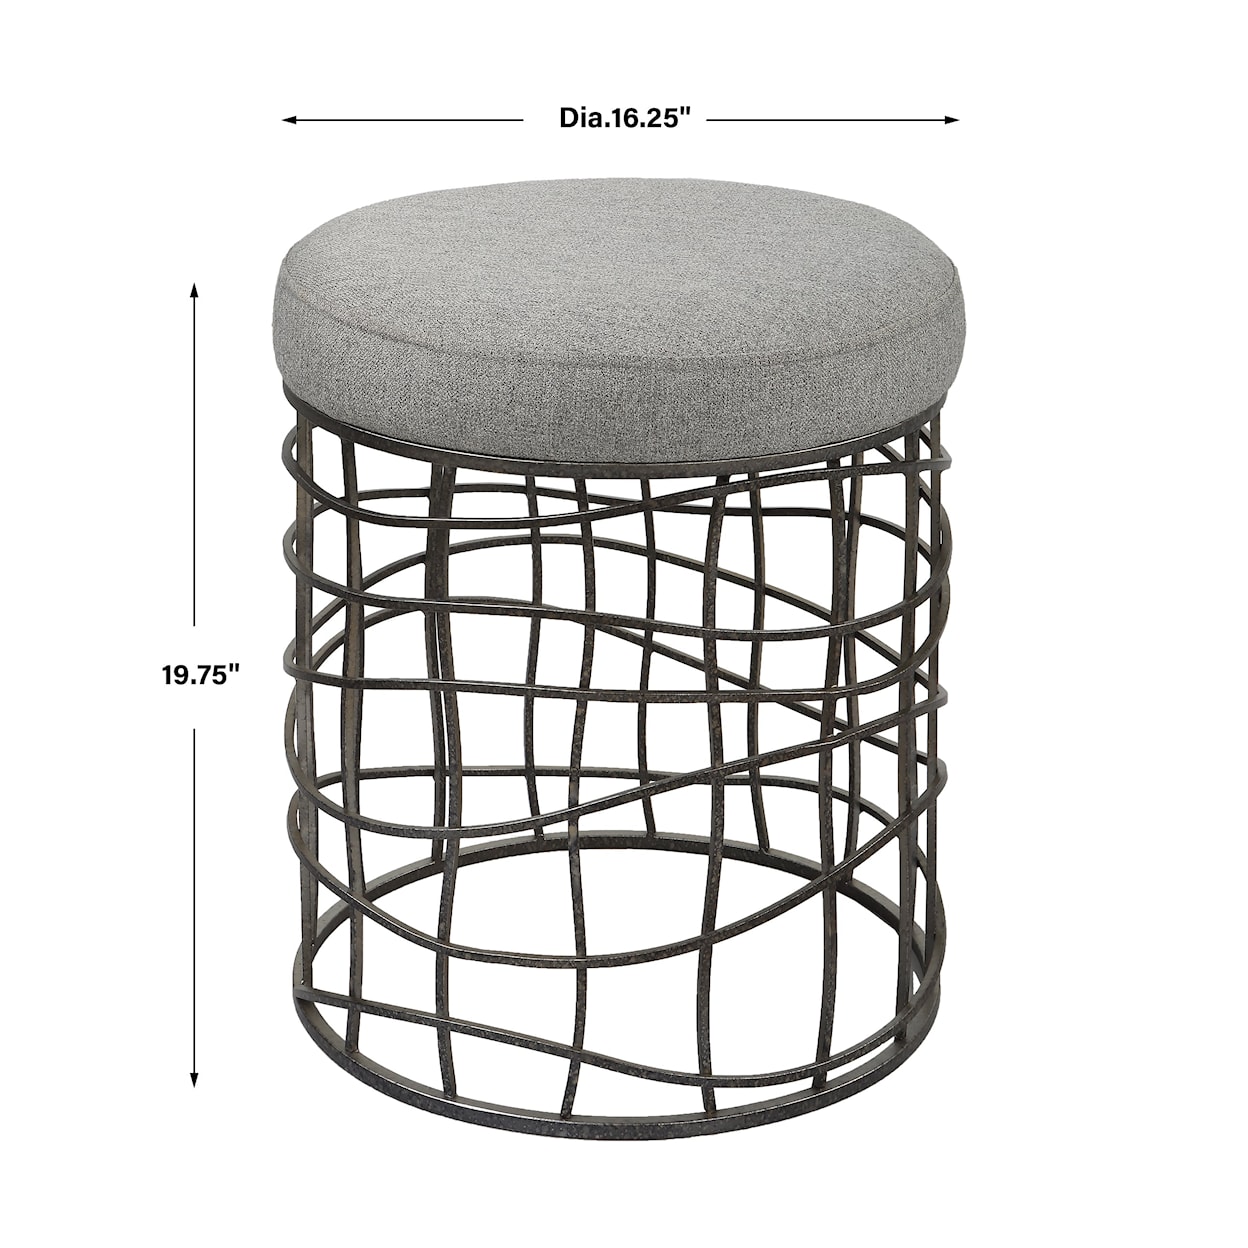 Uttermost Carnival Round Accent Stool with Upholstered Seat